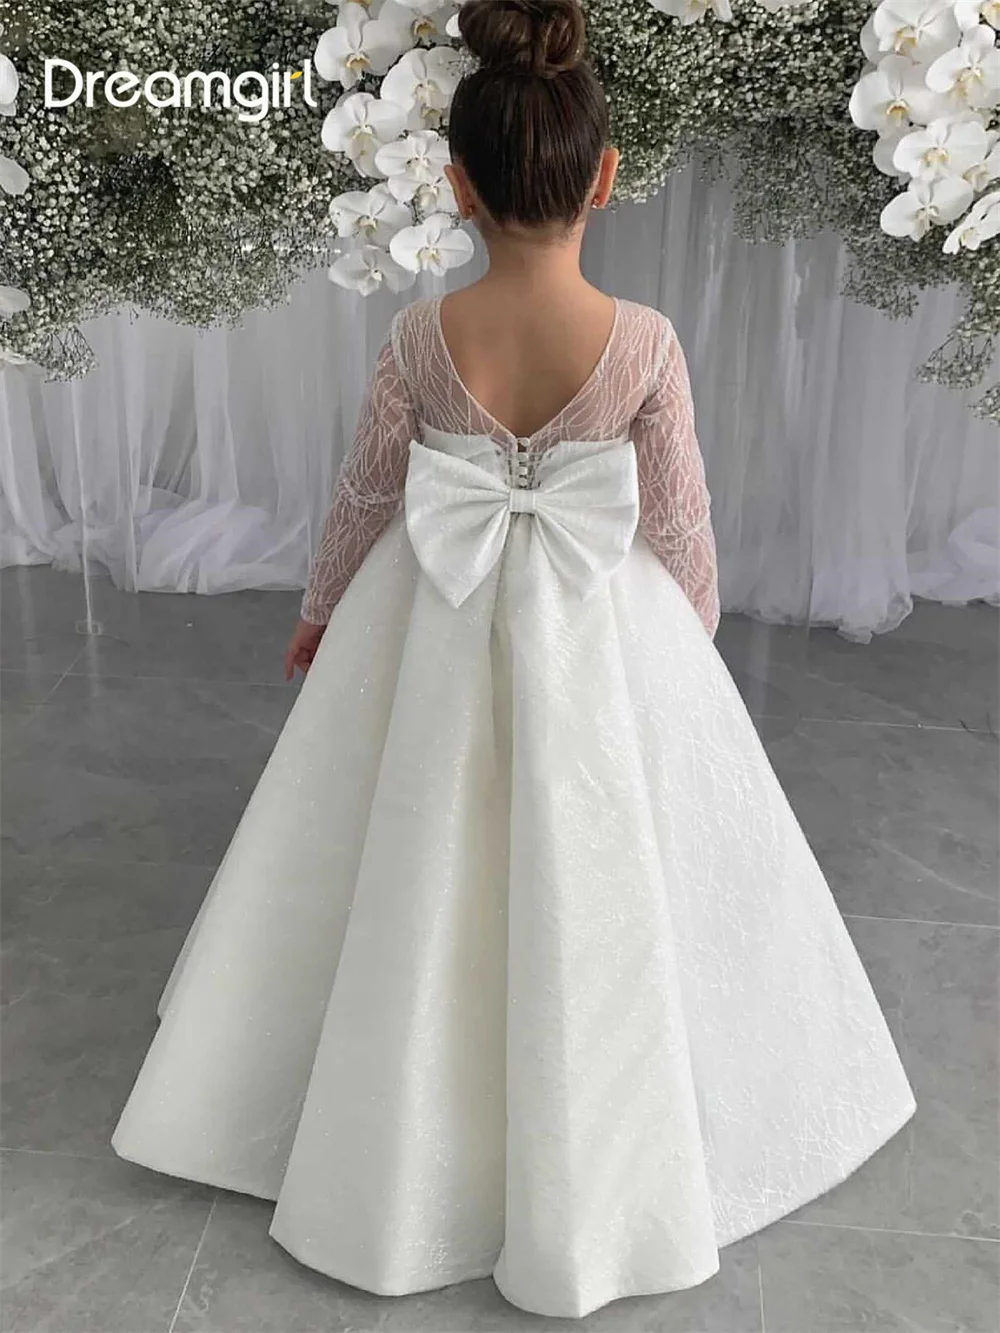 

Ivory Tulle Lace Applique Flower Girl Dresses Ball Gown Long Sleeve Bow Kids First Communion Dress Birthday Party Pageant Dress